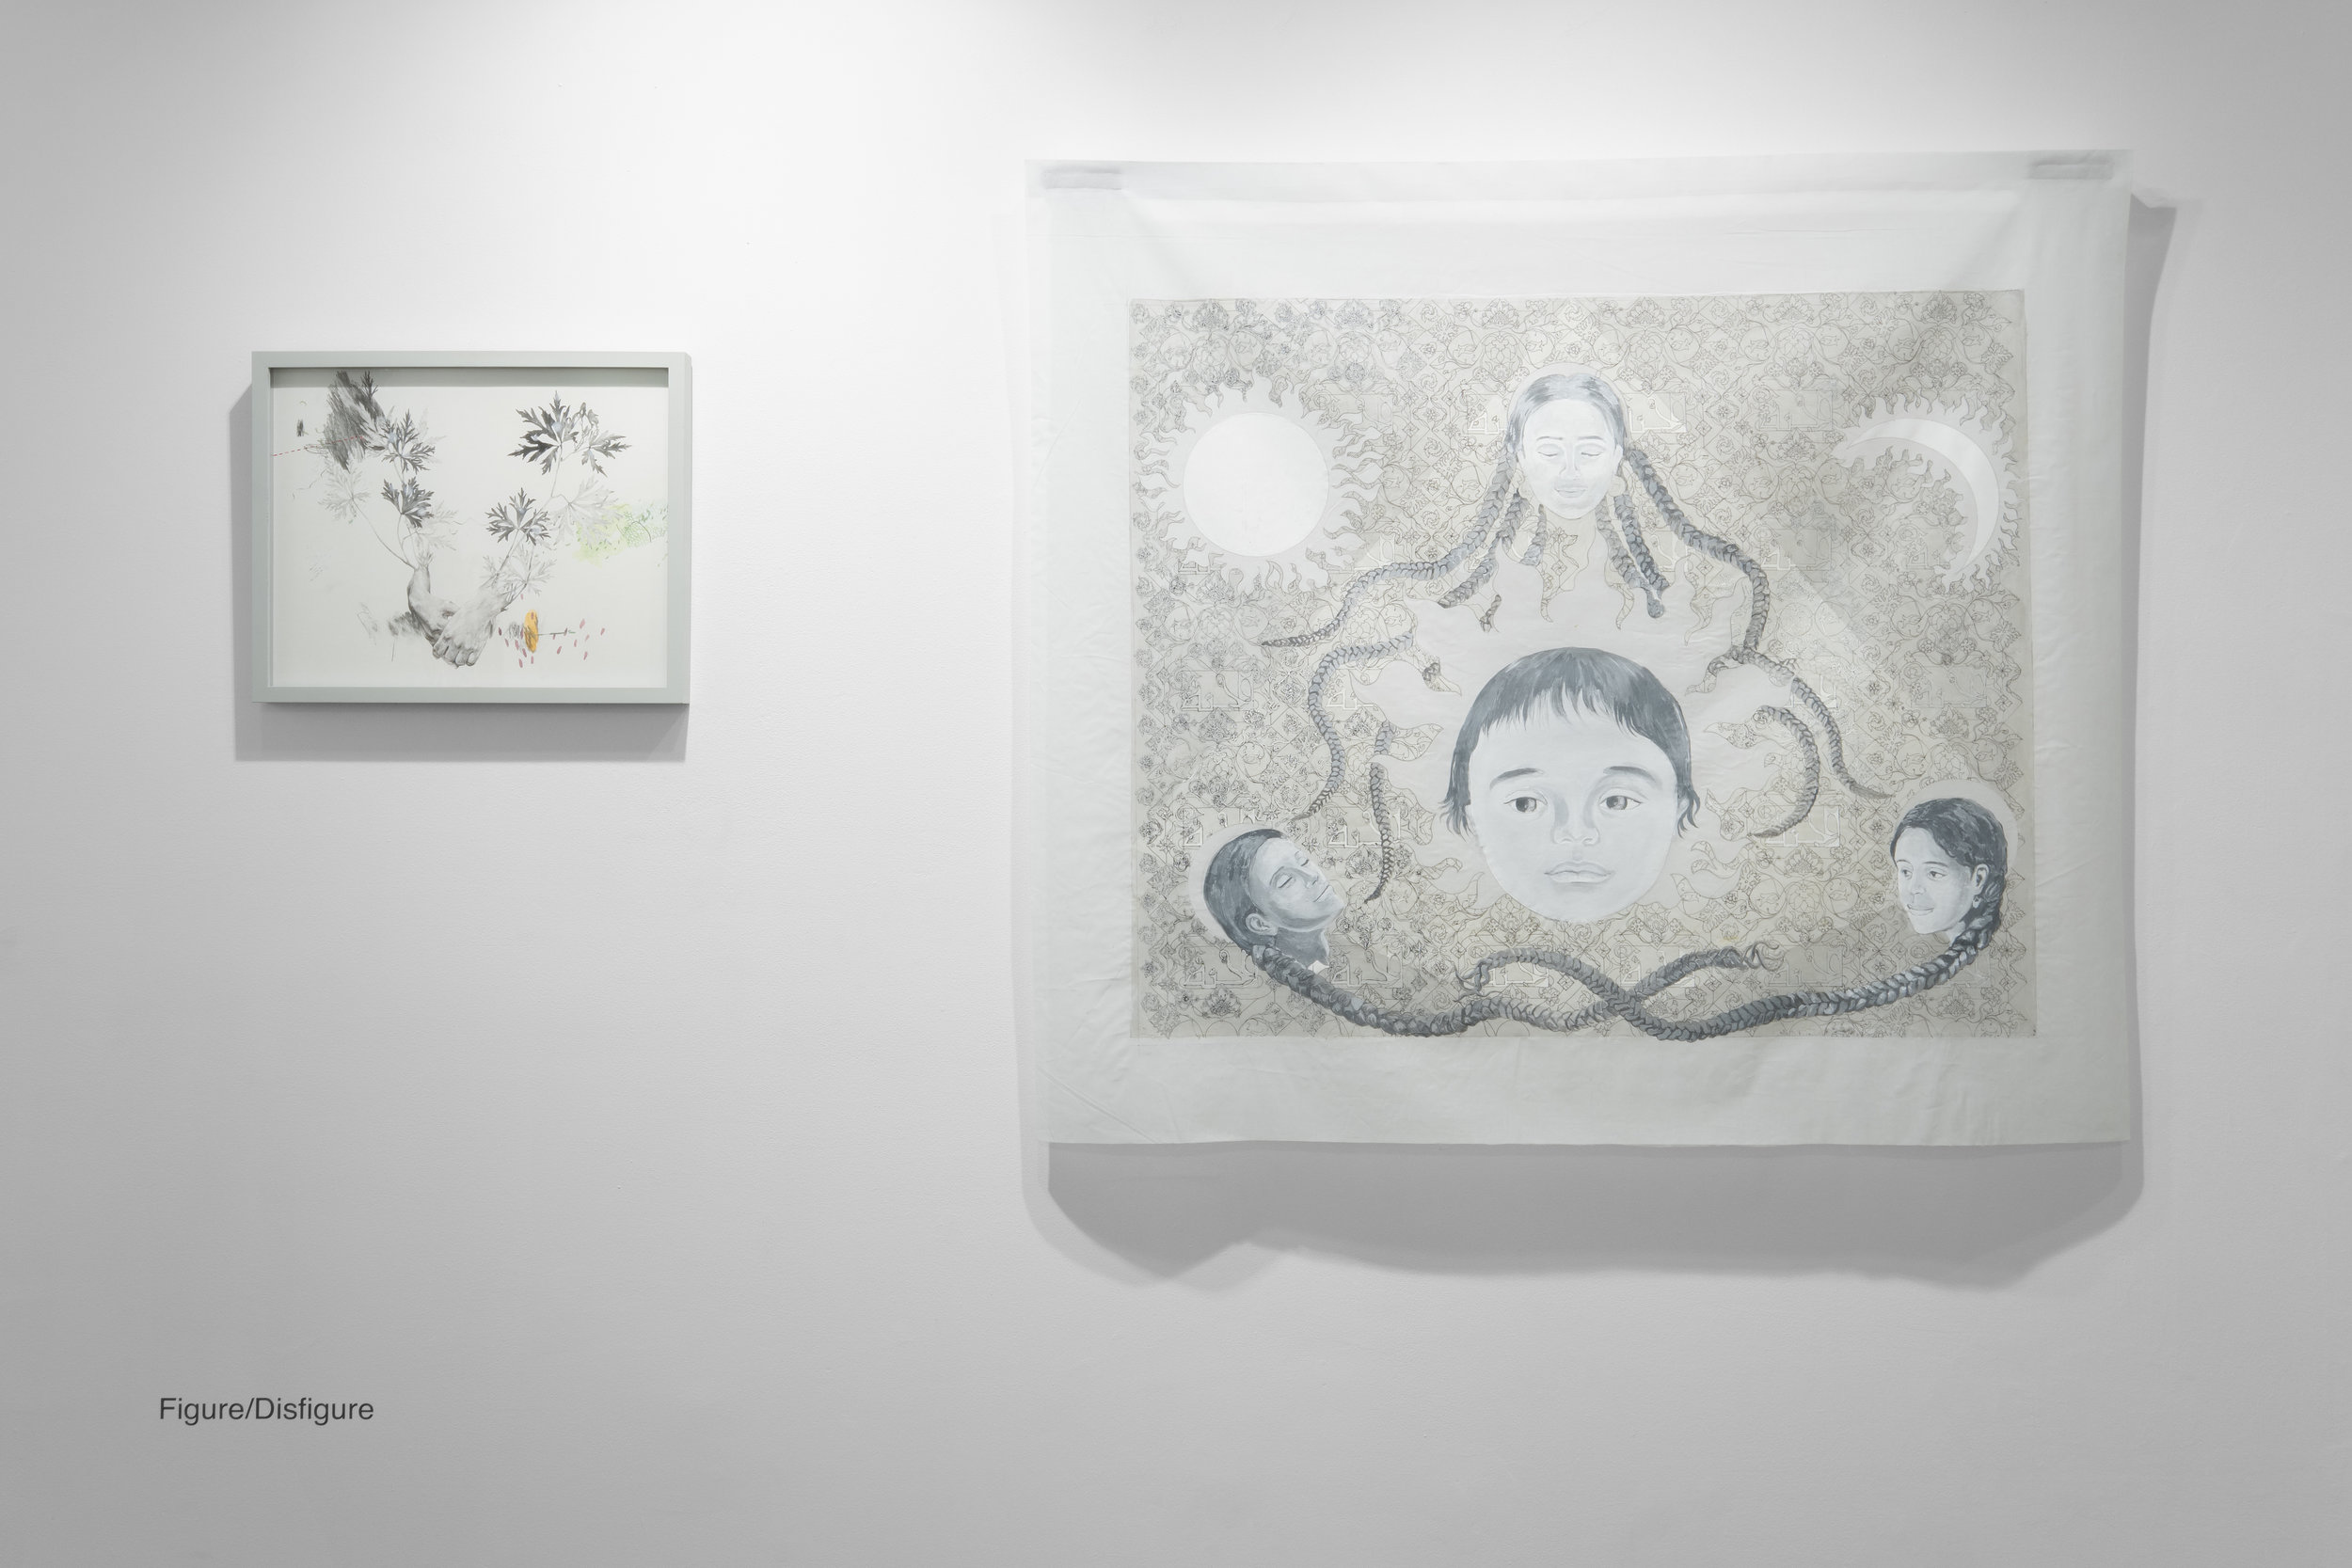  Left: Joo Yeon Woo,  Sitting in Nowhere , 2017. Ink, acylic paint on paper  Right: Hend Al-Mansour,  Flower of Paradise,  2013. Paint on cotton 